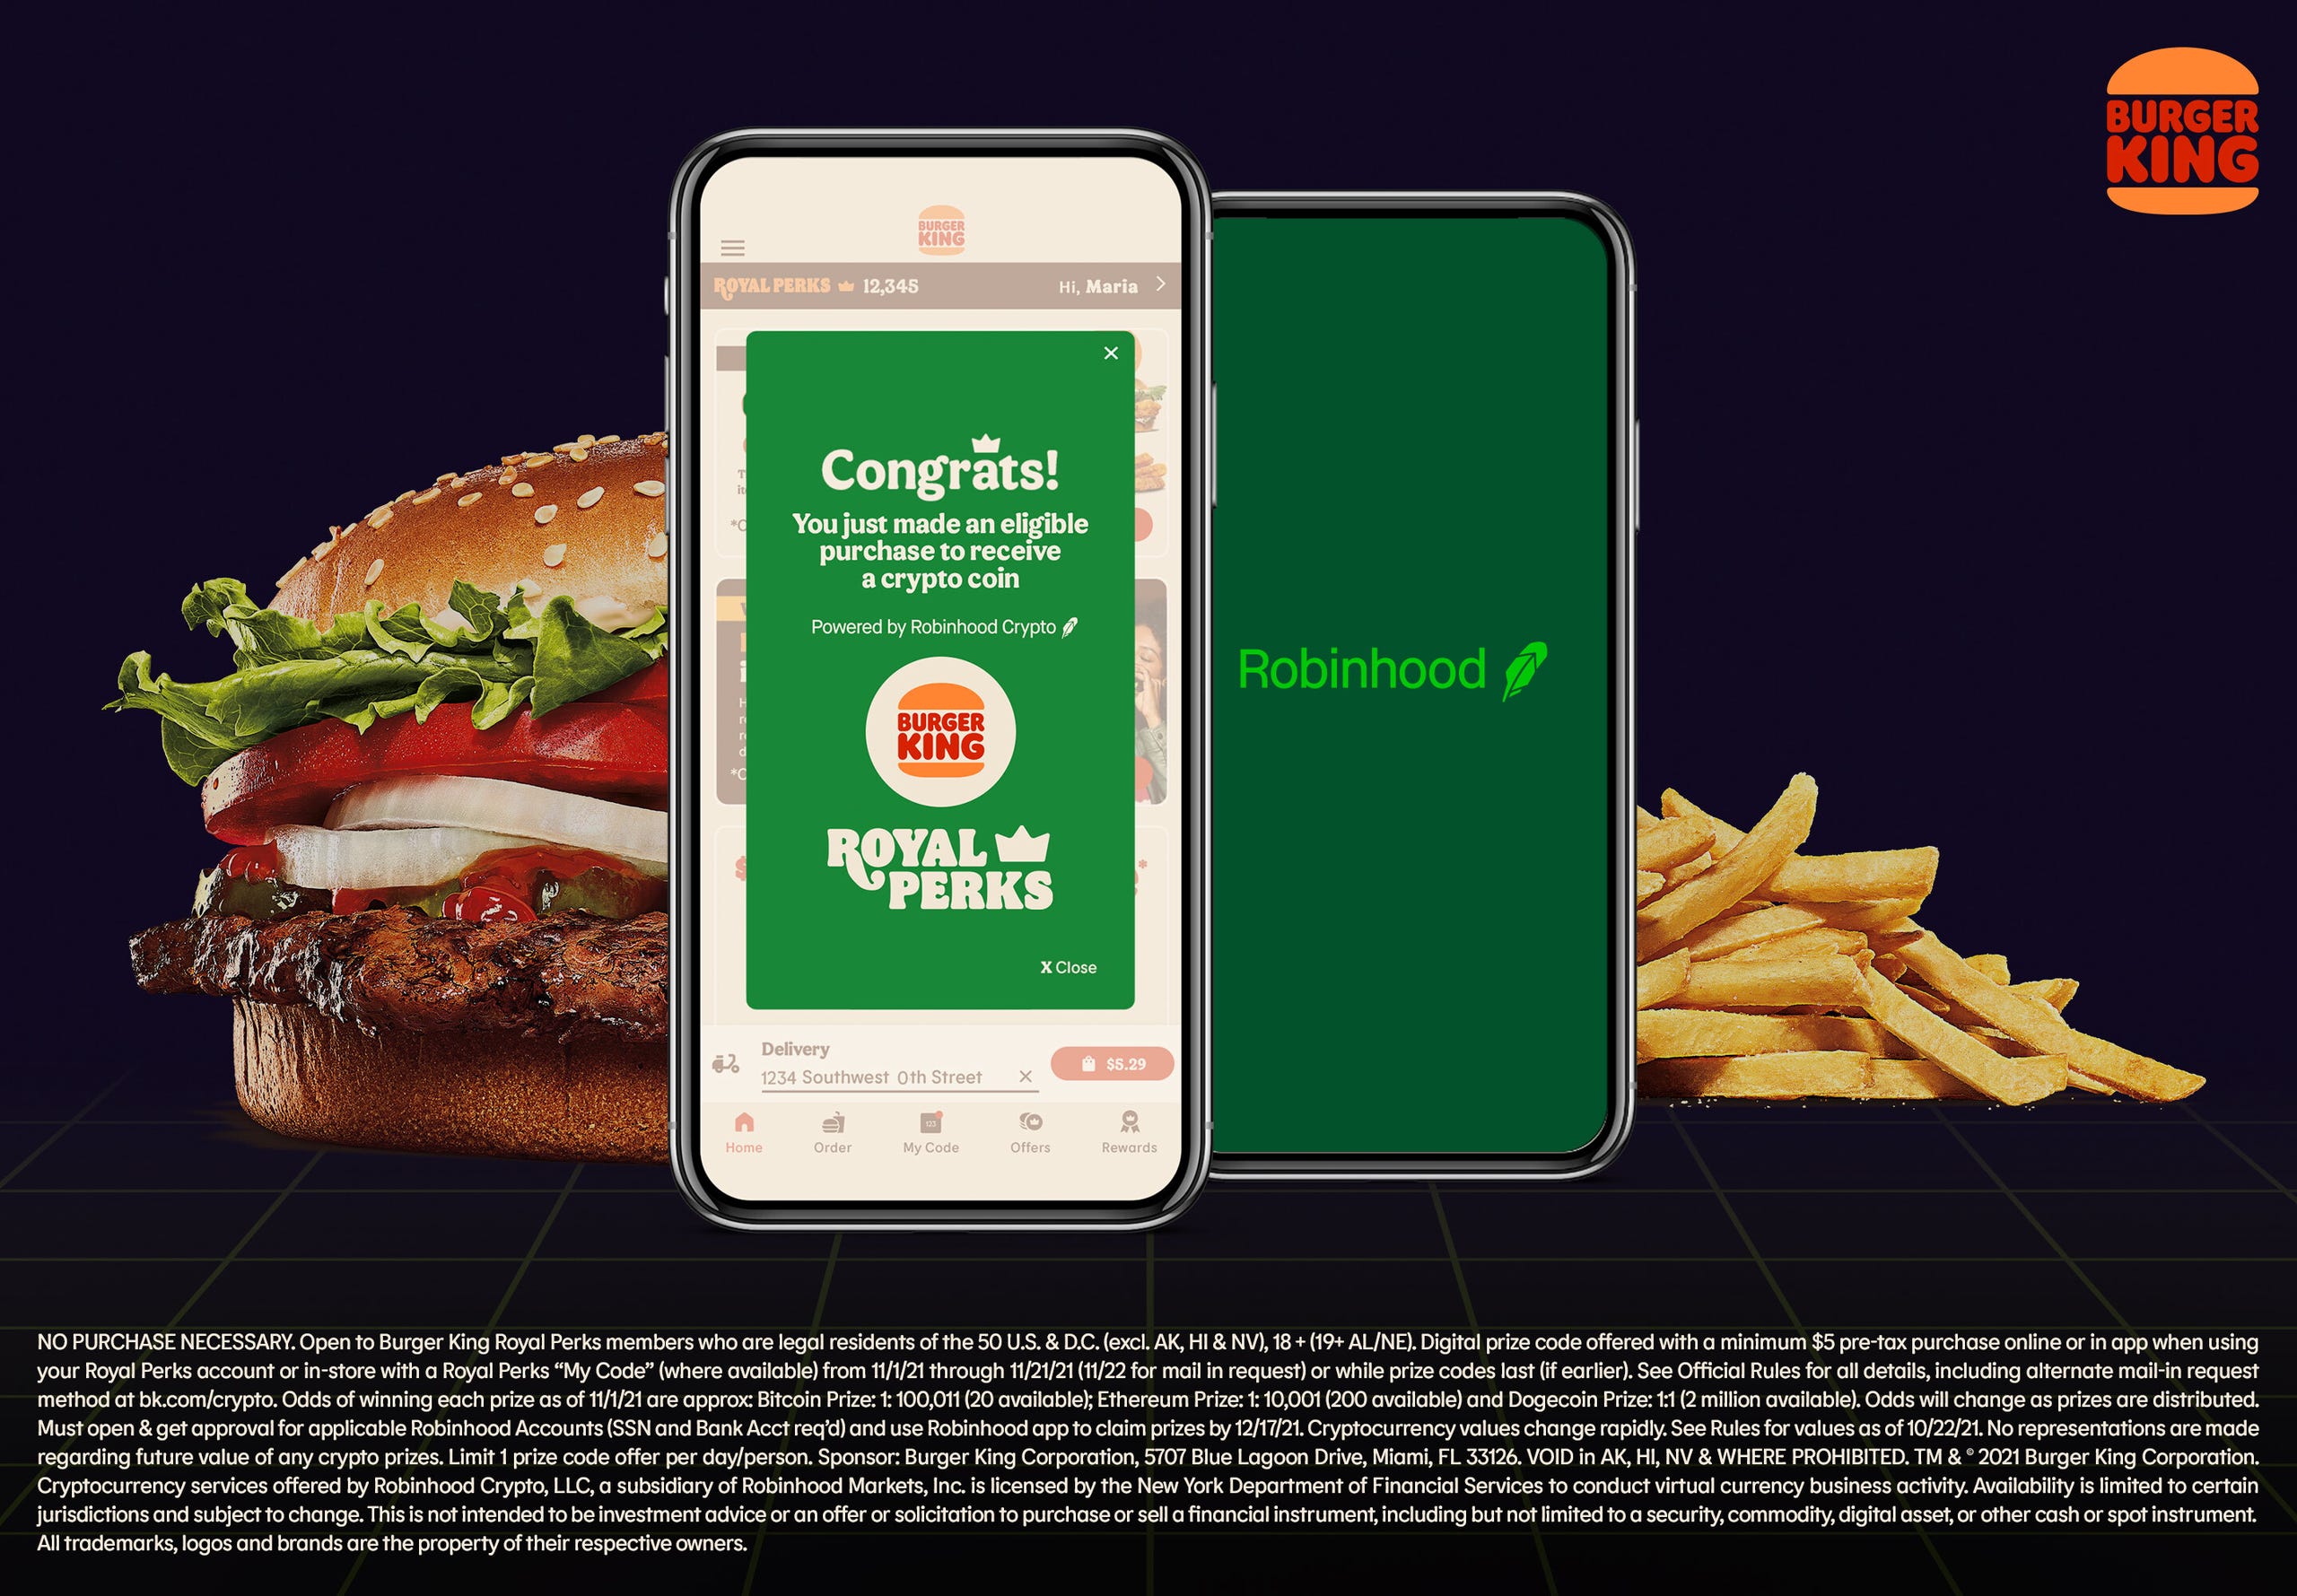 Burger King has partnered with Robinhood on an offering through the fast food chain's loyalty program.